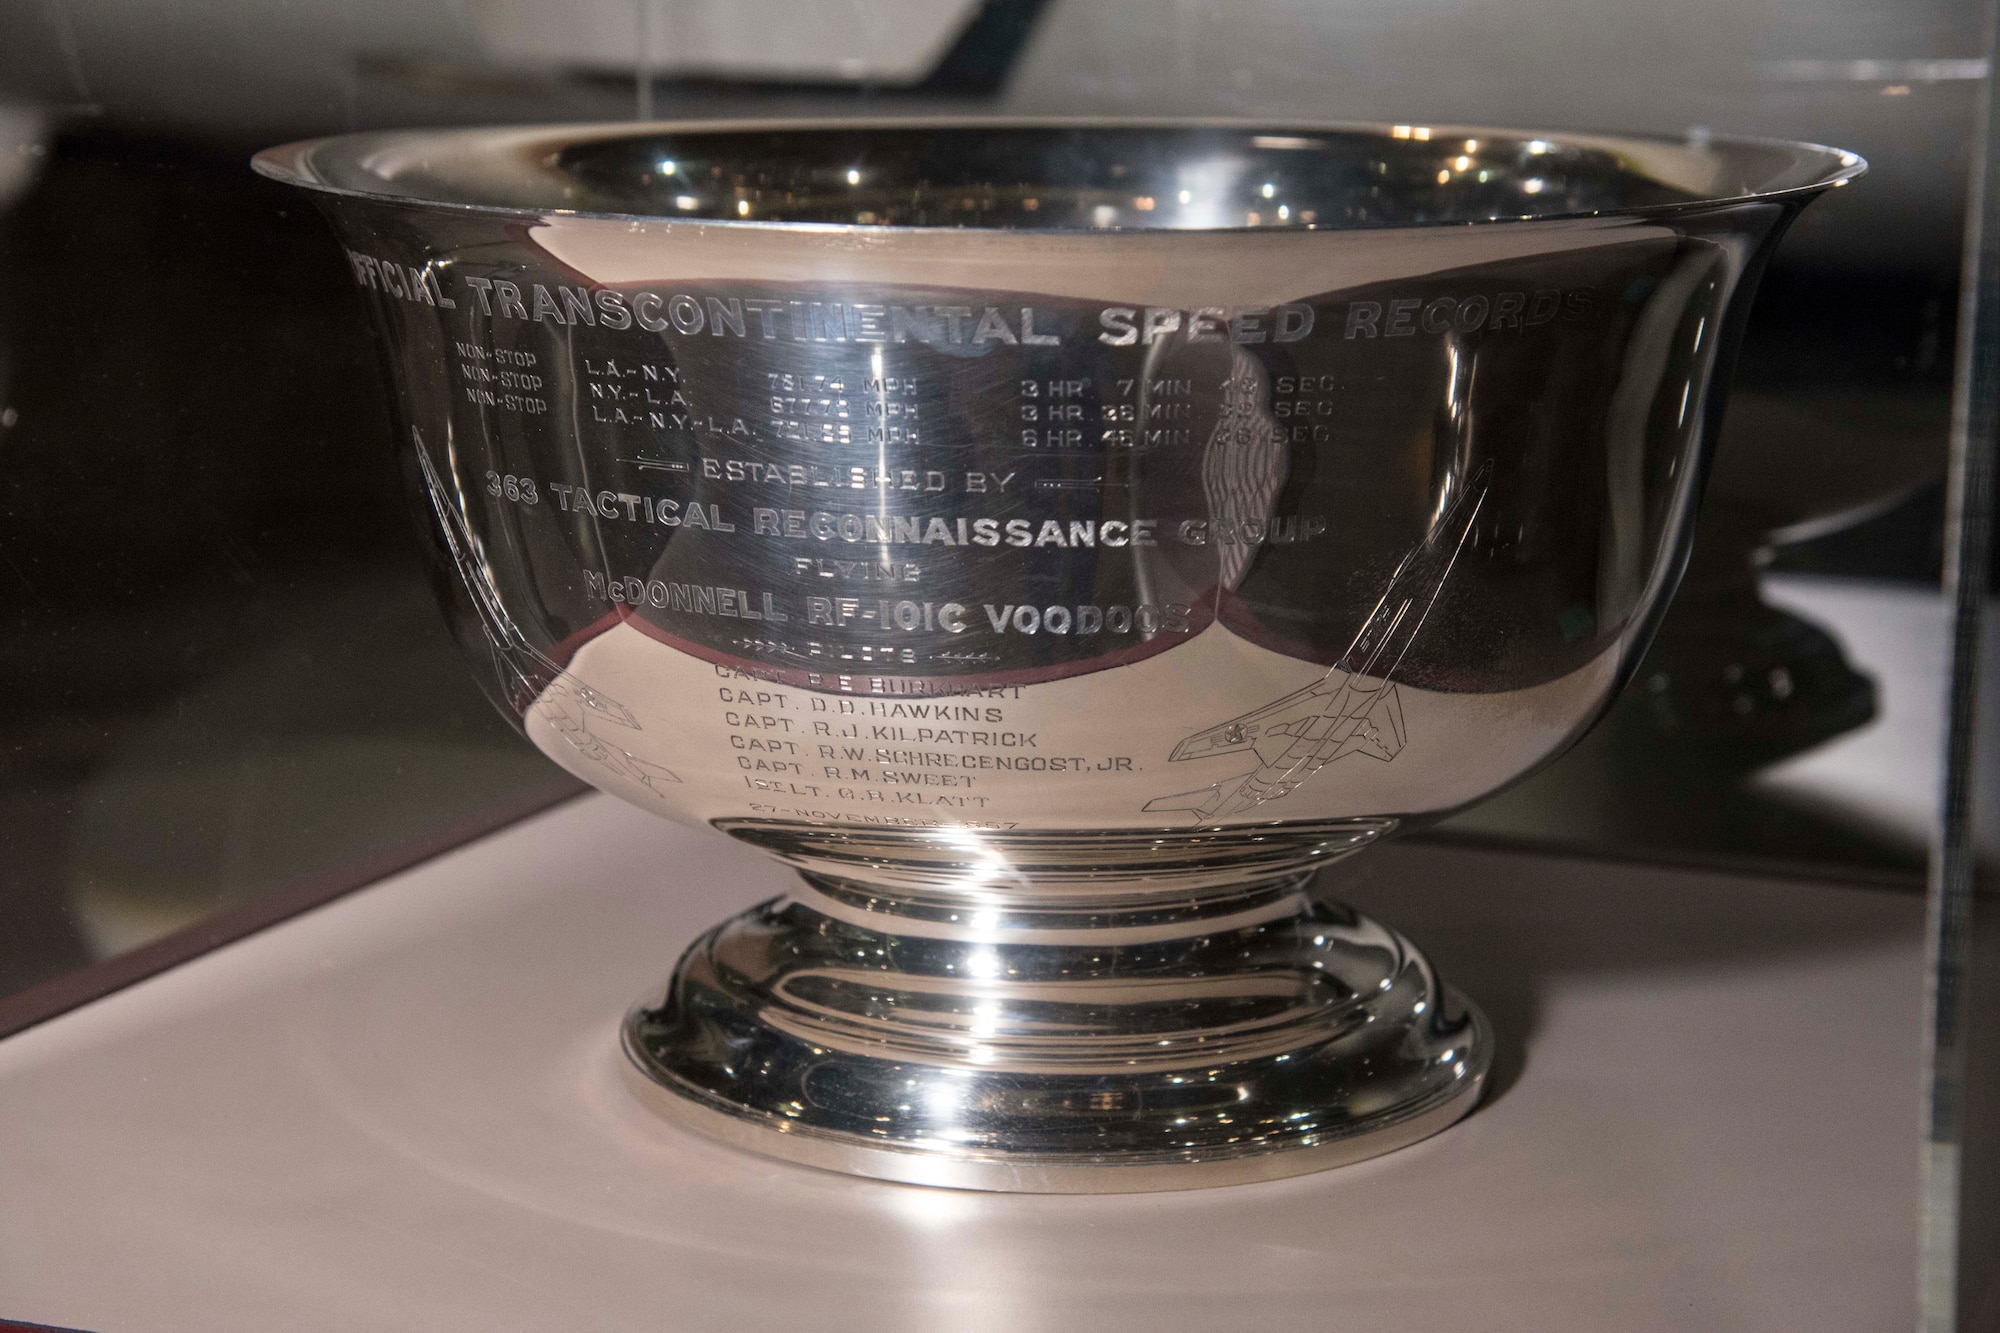 This trophy was presented by the McDonnell Aircraft Corp. to the 363rd Tactical Reconnaissance Wing in recognition of establishing three new transcontinental speed records flying RF-101C aircraft on Nov. 27, 1957. It was donated to the museum by the RF-101 Pilots' Reunion Group in 1998. (U.S. Air Force photo)